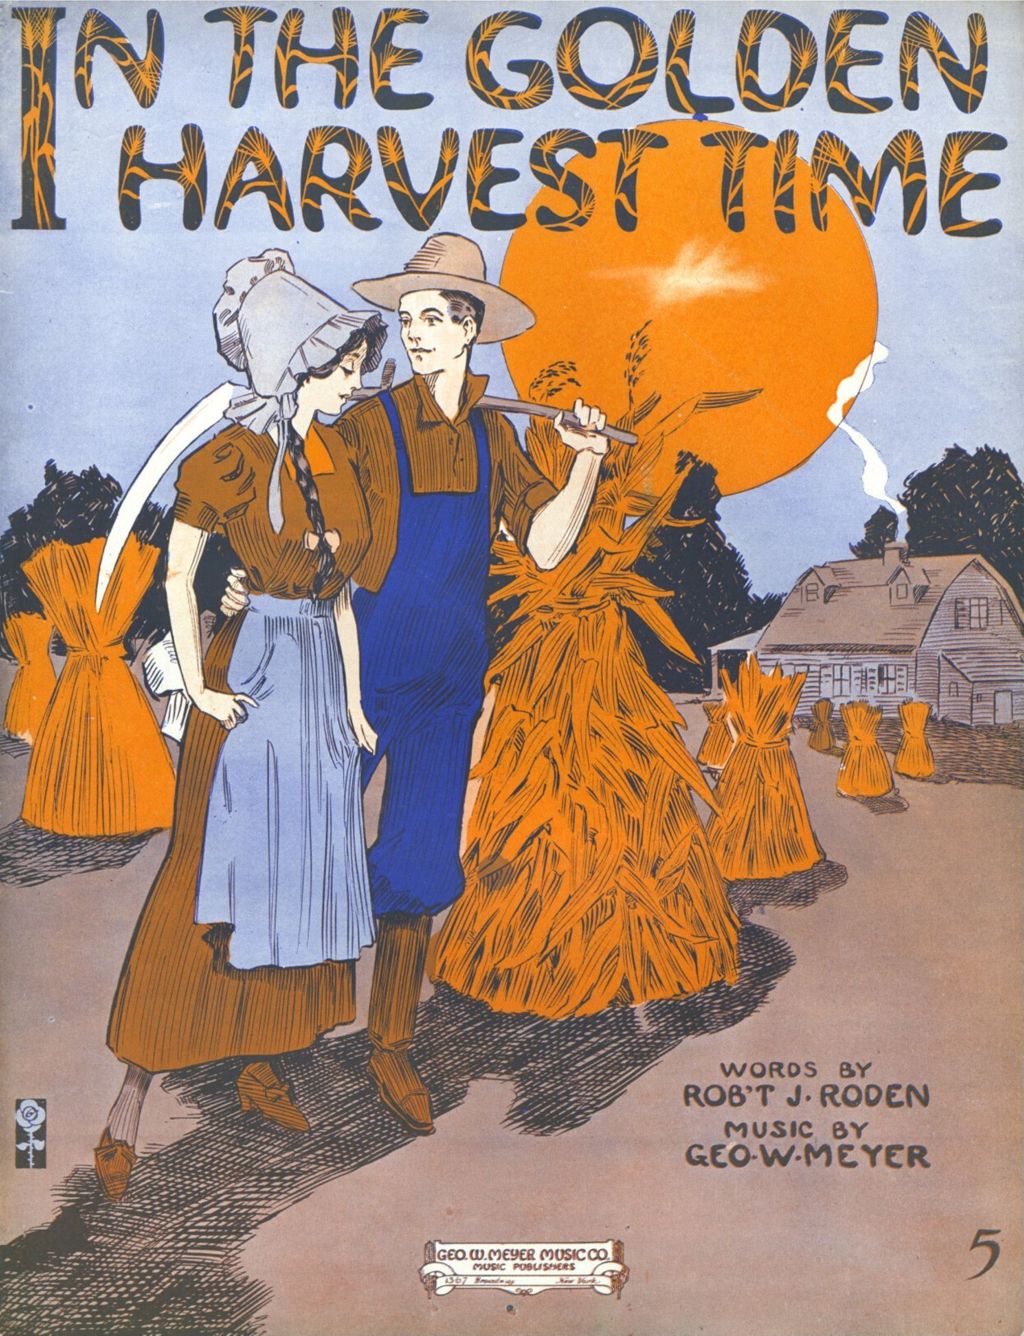 In The Golden Harvest Time